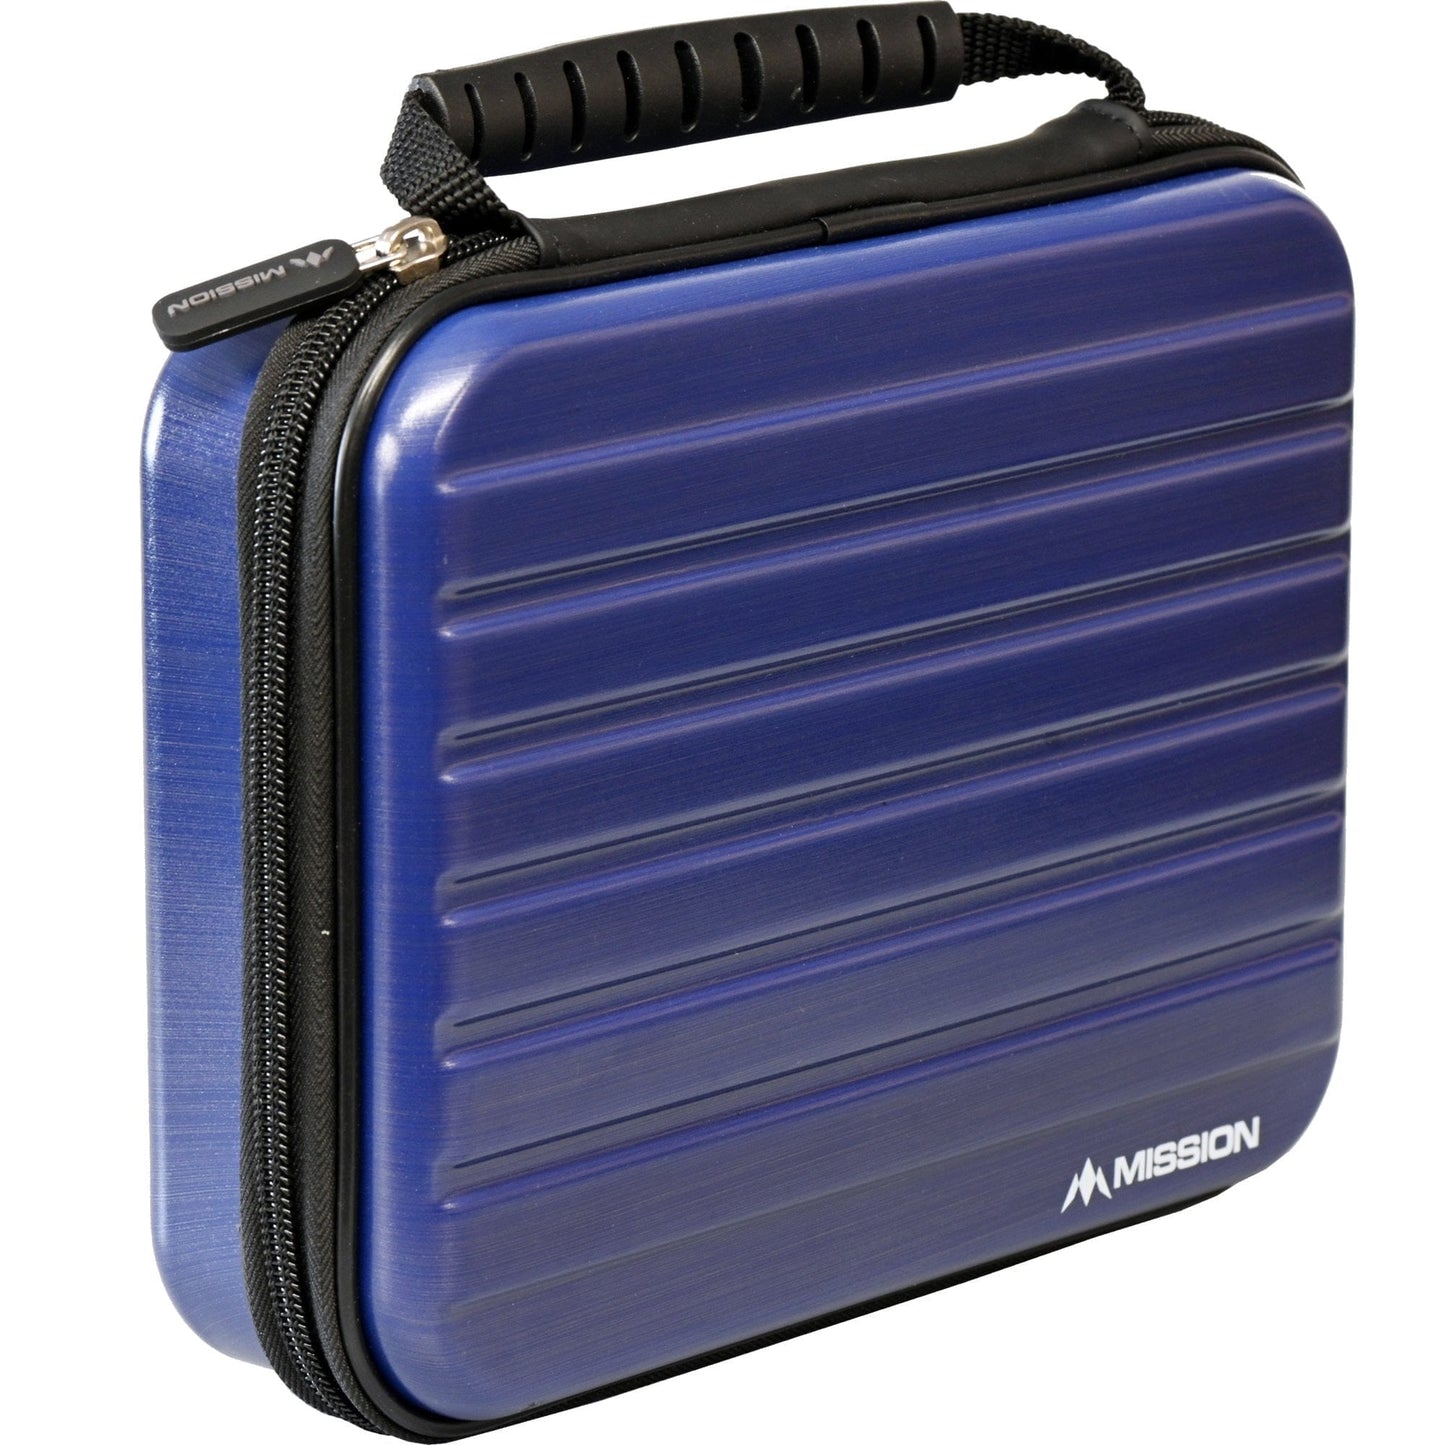 Mission ABS-4 Darts Case - Strong Protection - Metallic Dark Blue